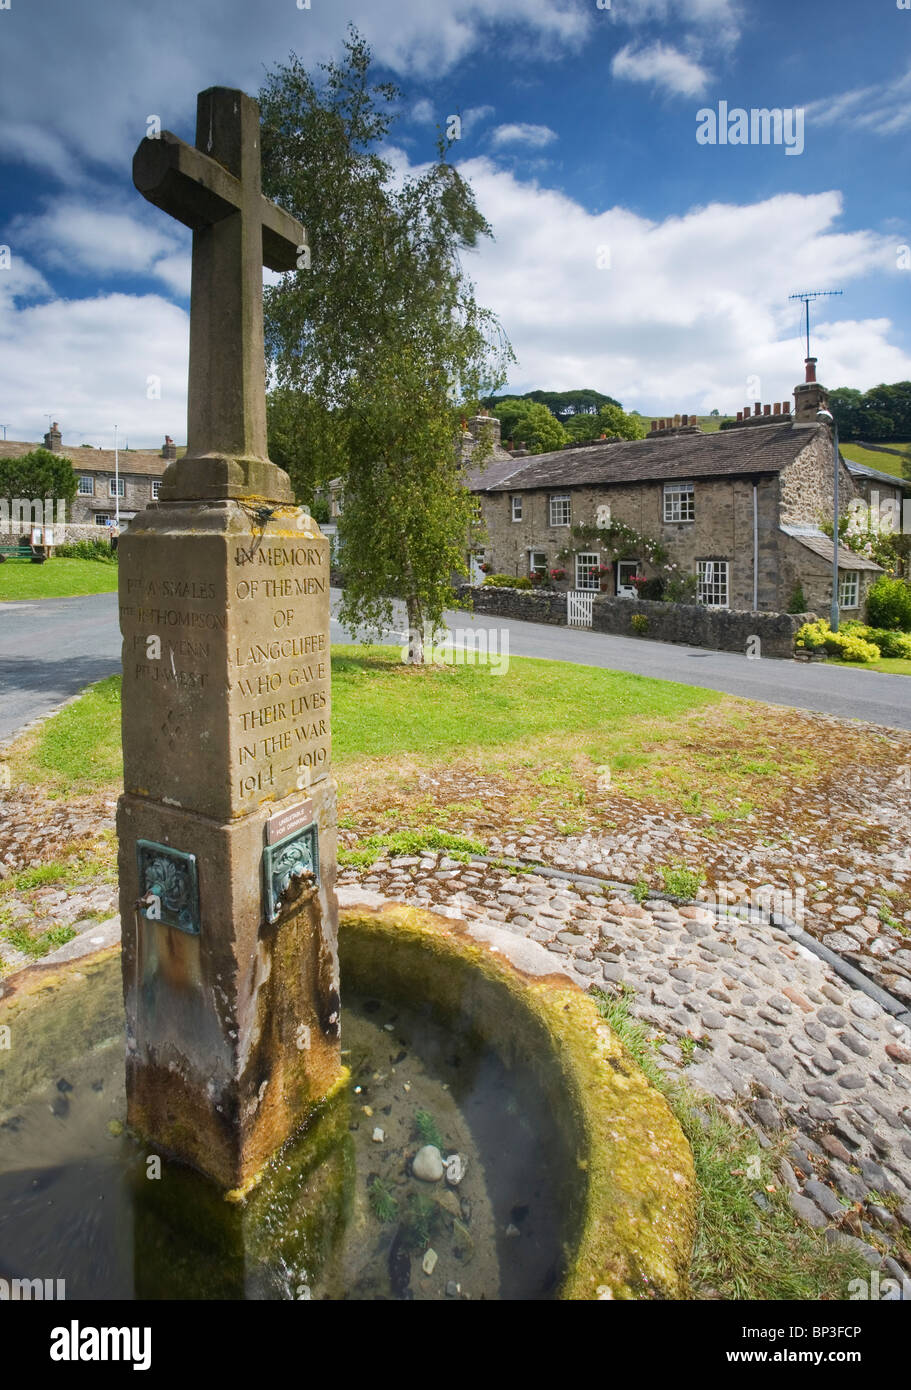 Langcliffe Village, near the market town of Settle in the Craven District Yorkshire Dales UK Stock Photo